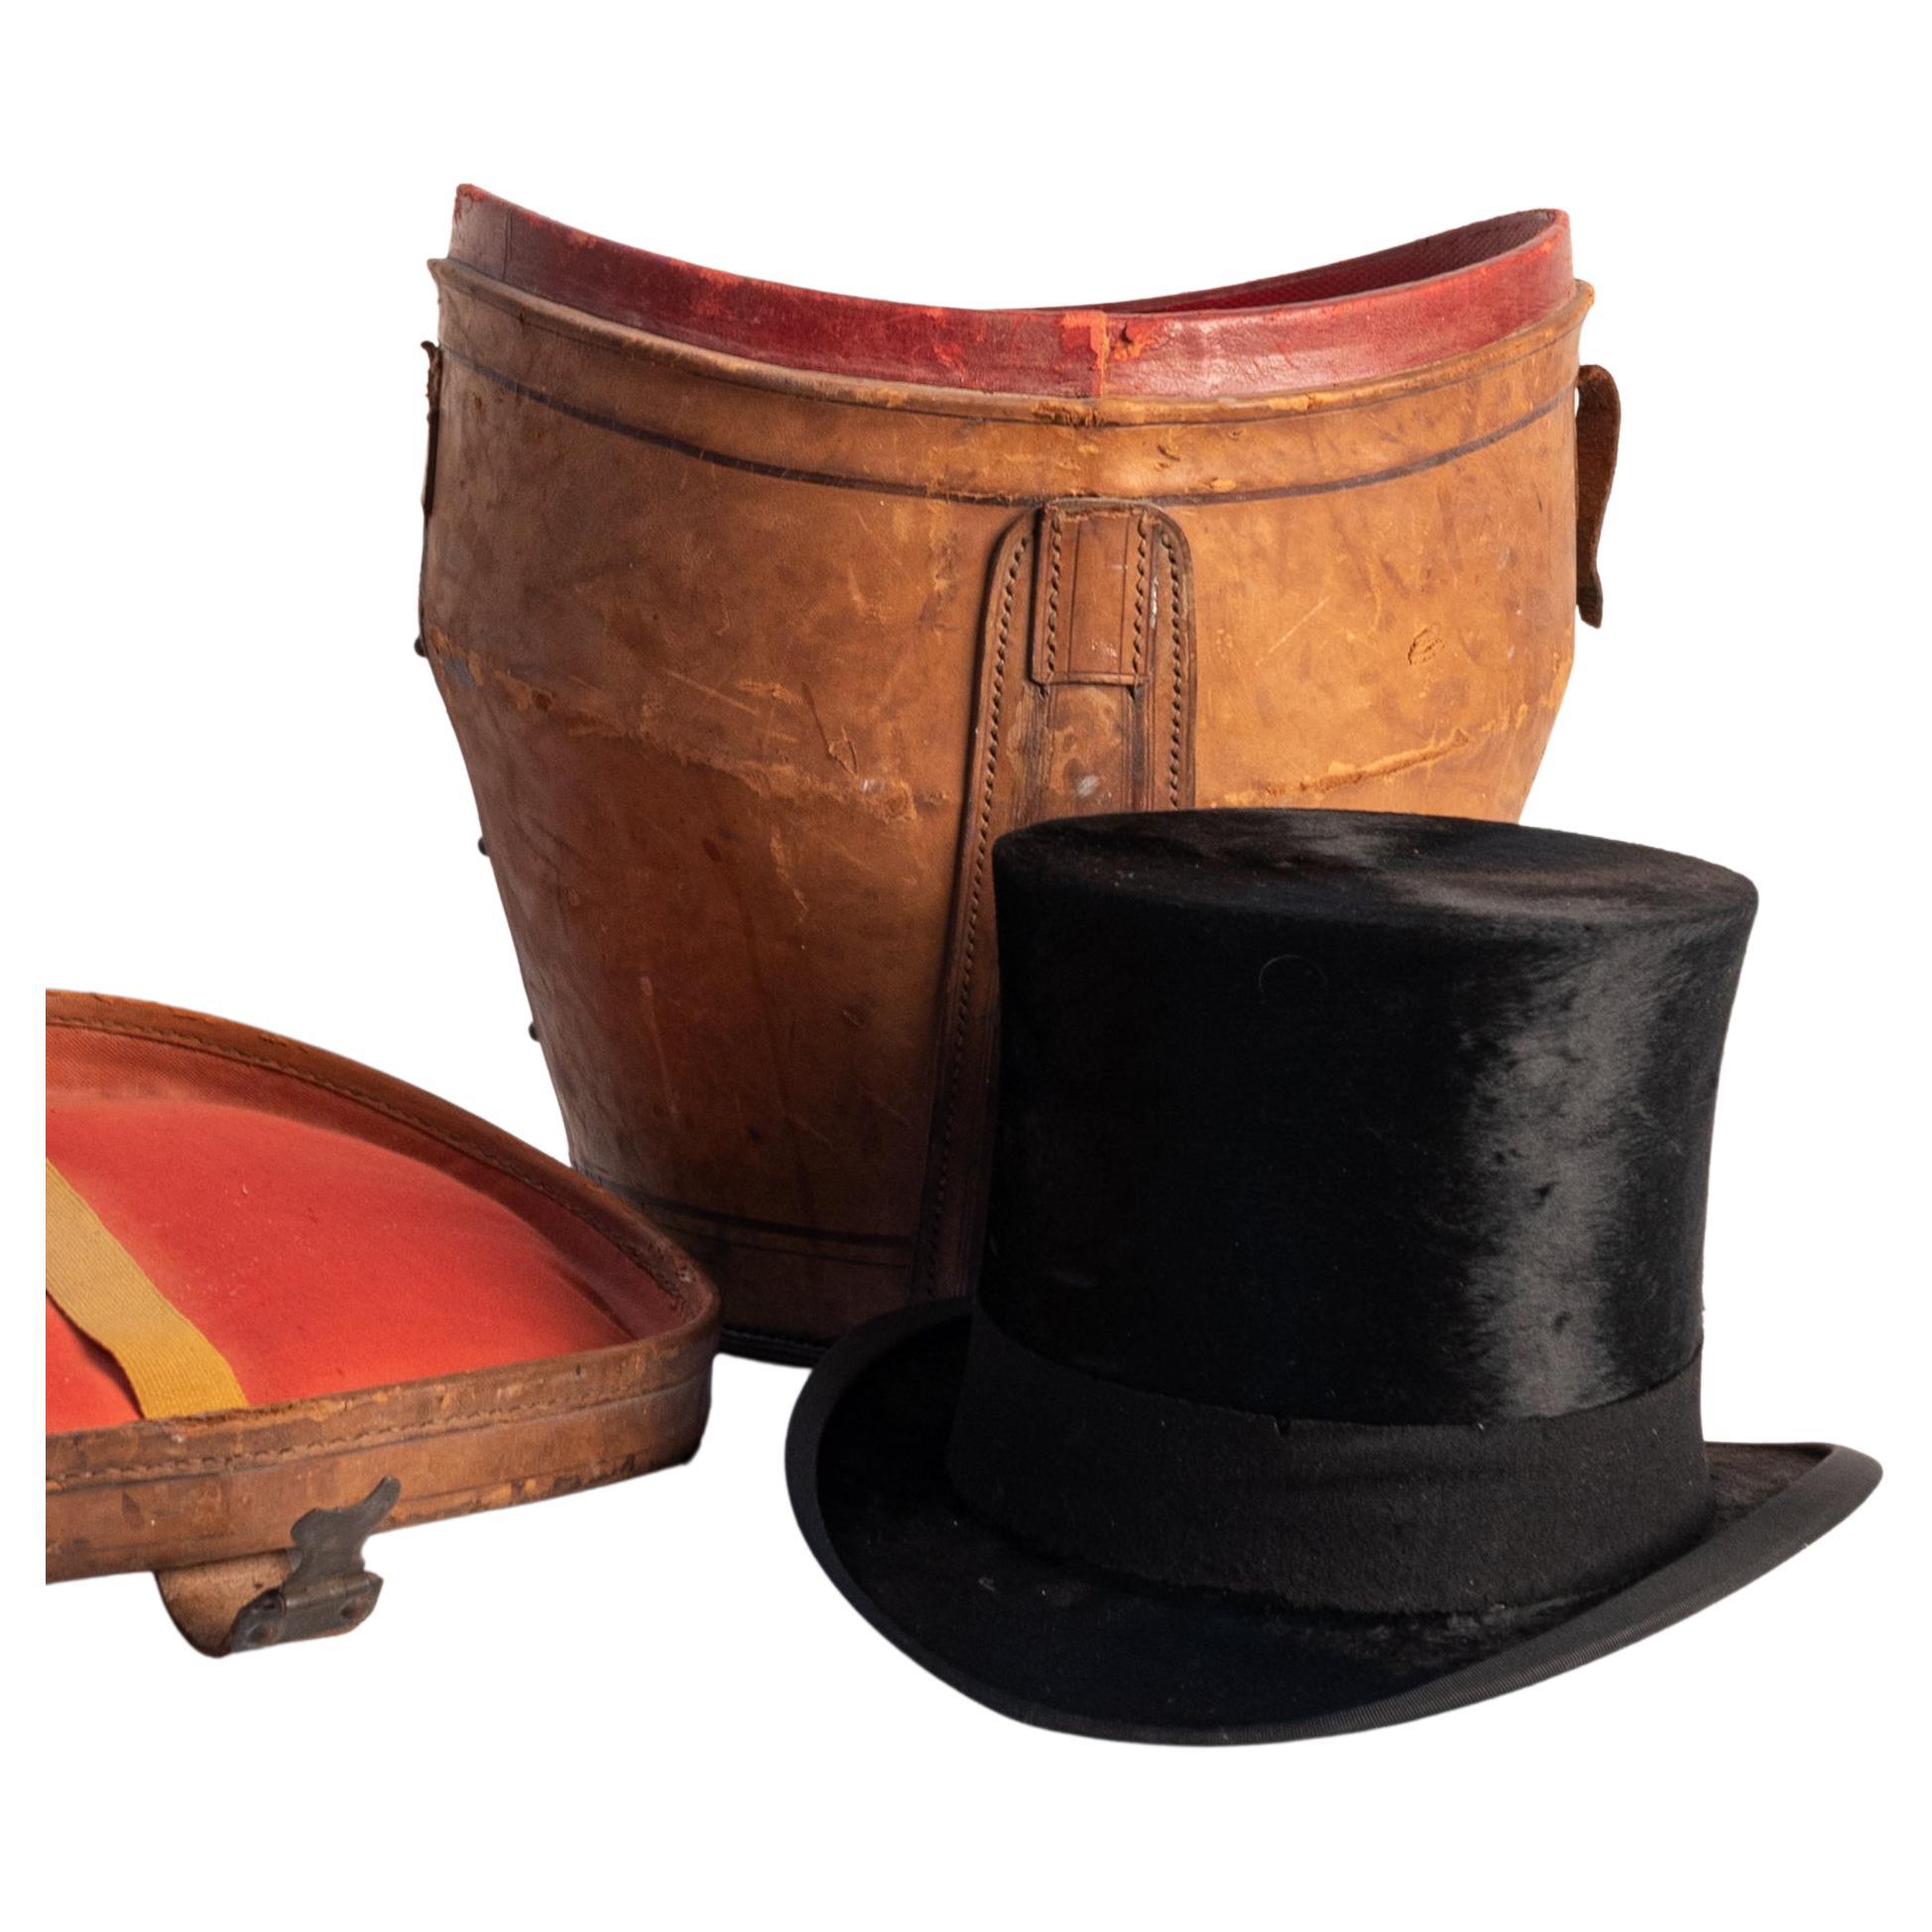 Moleskin top hat, with leather hatbox (late 19th - early 20th century)